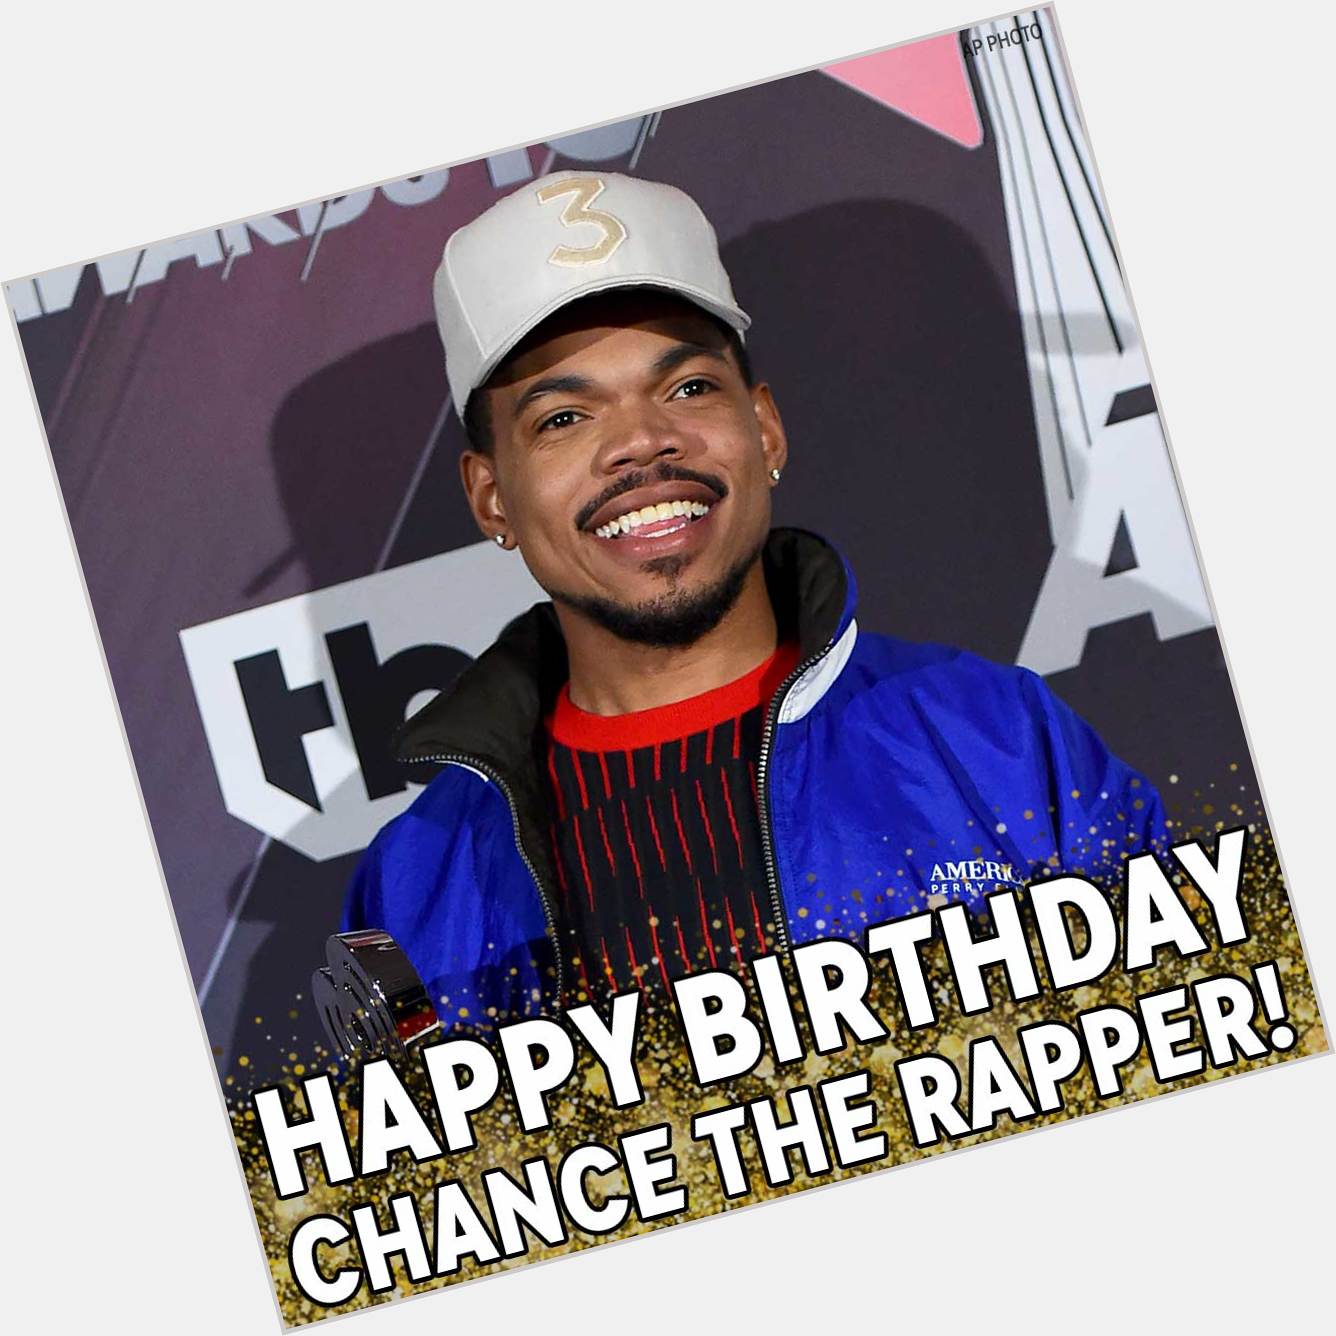 Happy Birthday, Chance the Rapper! We hope the three-time Grammy winner has a great day. 